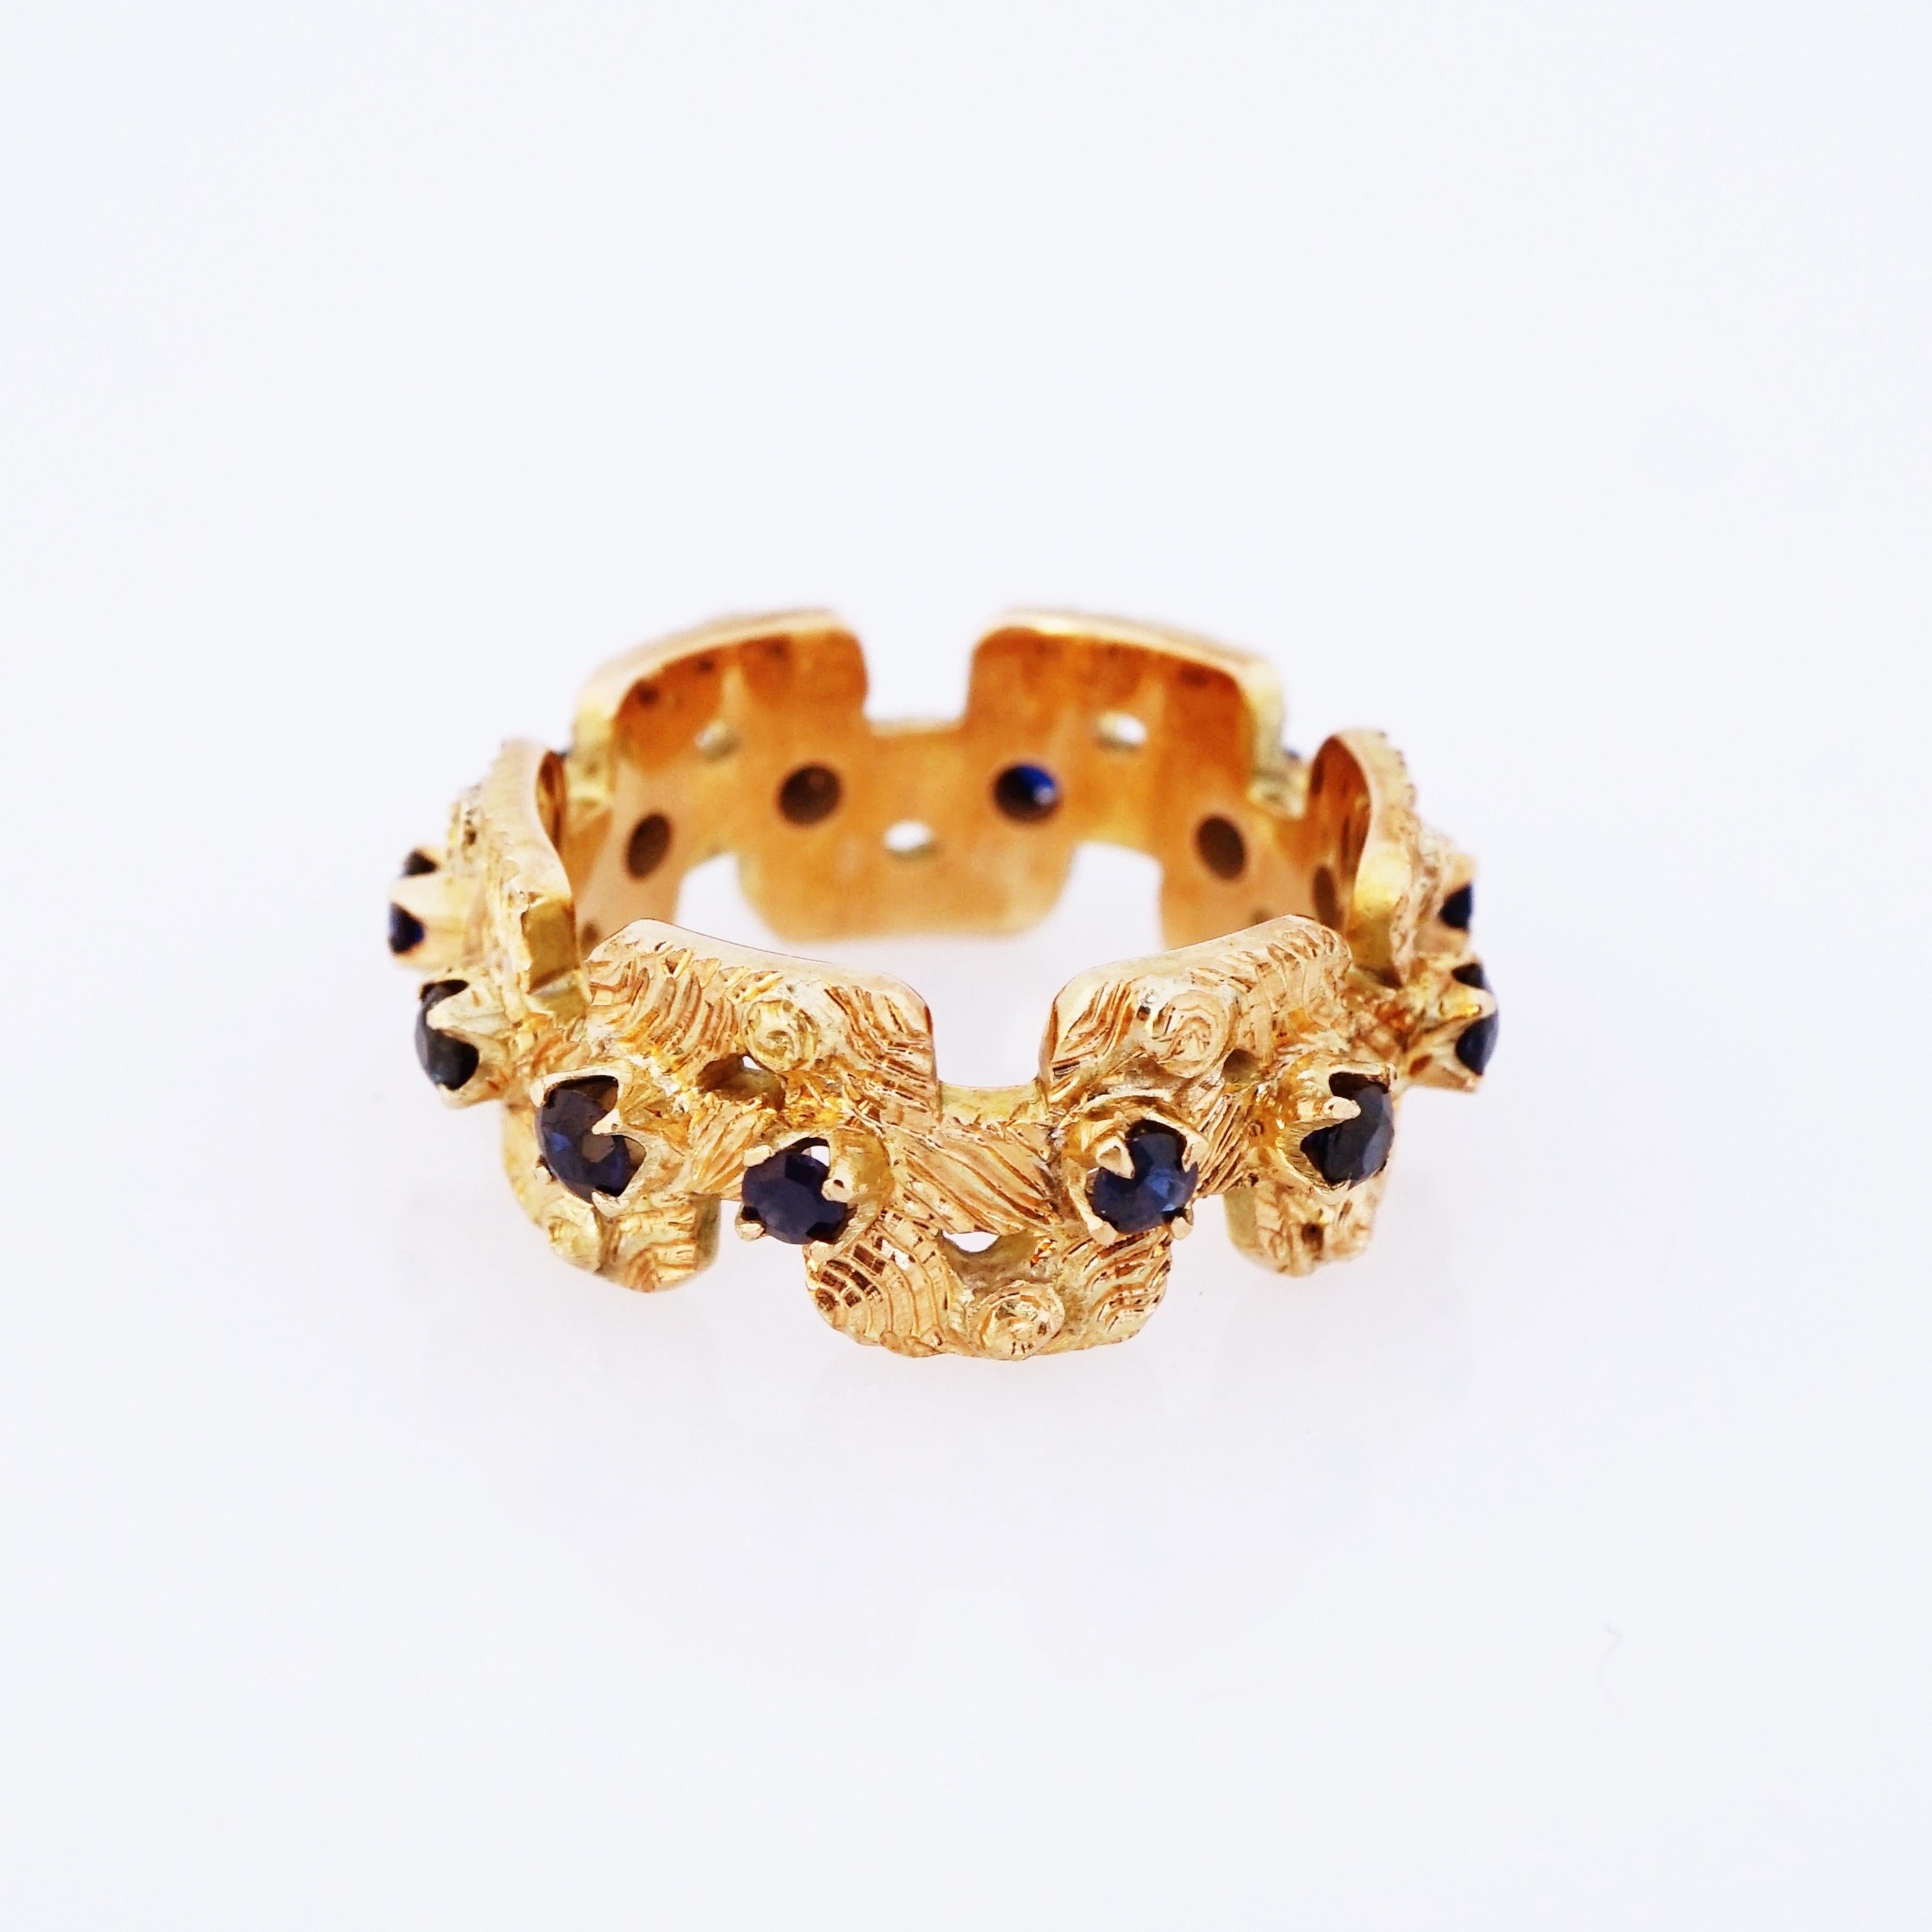 18k Gold Textured Modernist Ring with Sapphires, 1970s In Good Condition For Sale In McKinney, TX